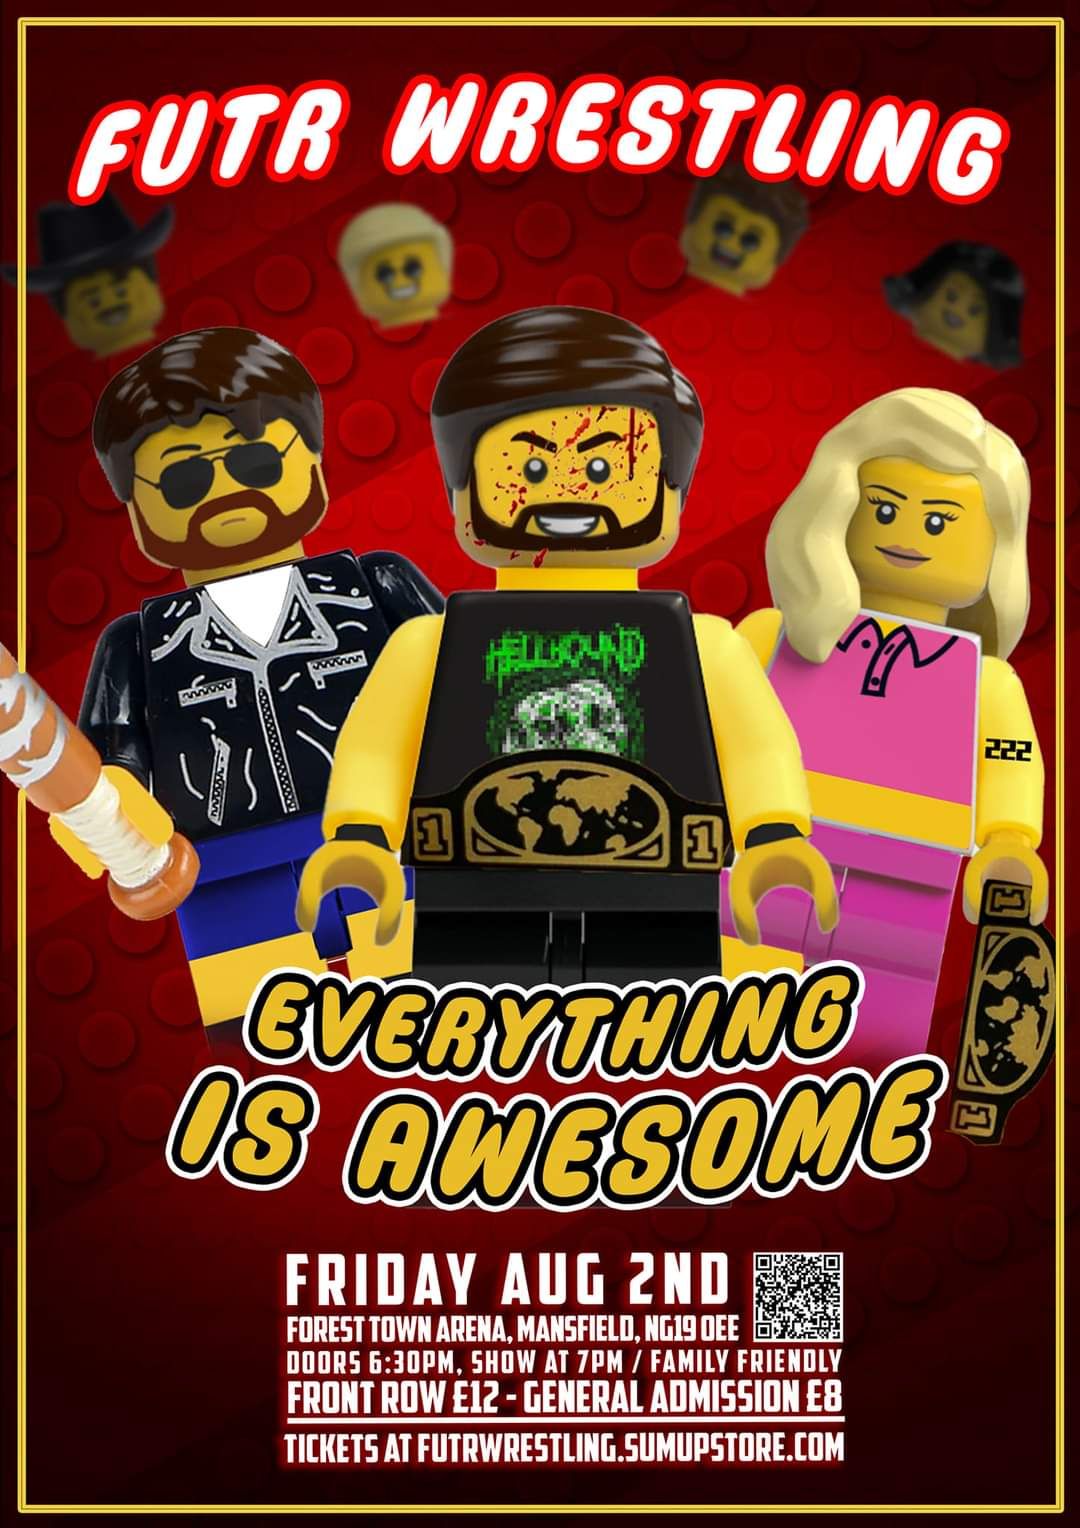 FUTR Wrestling, Mansfield, Everything is Awesome 